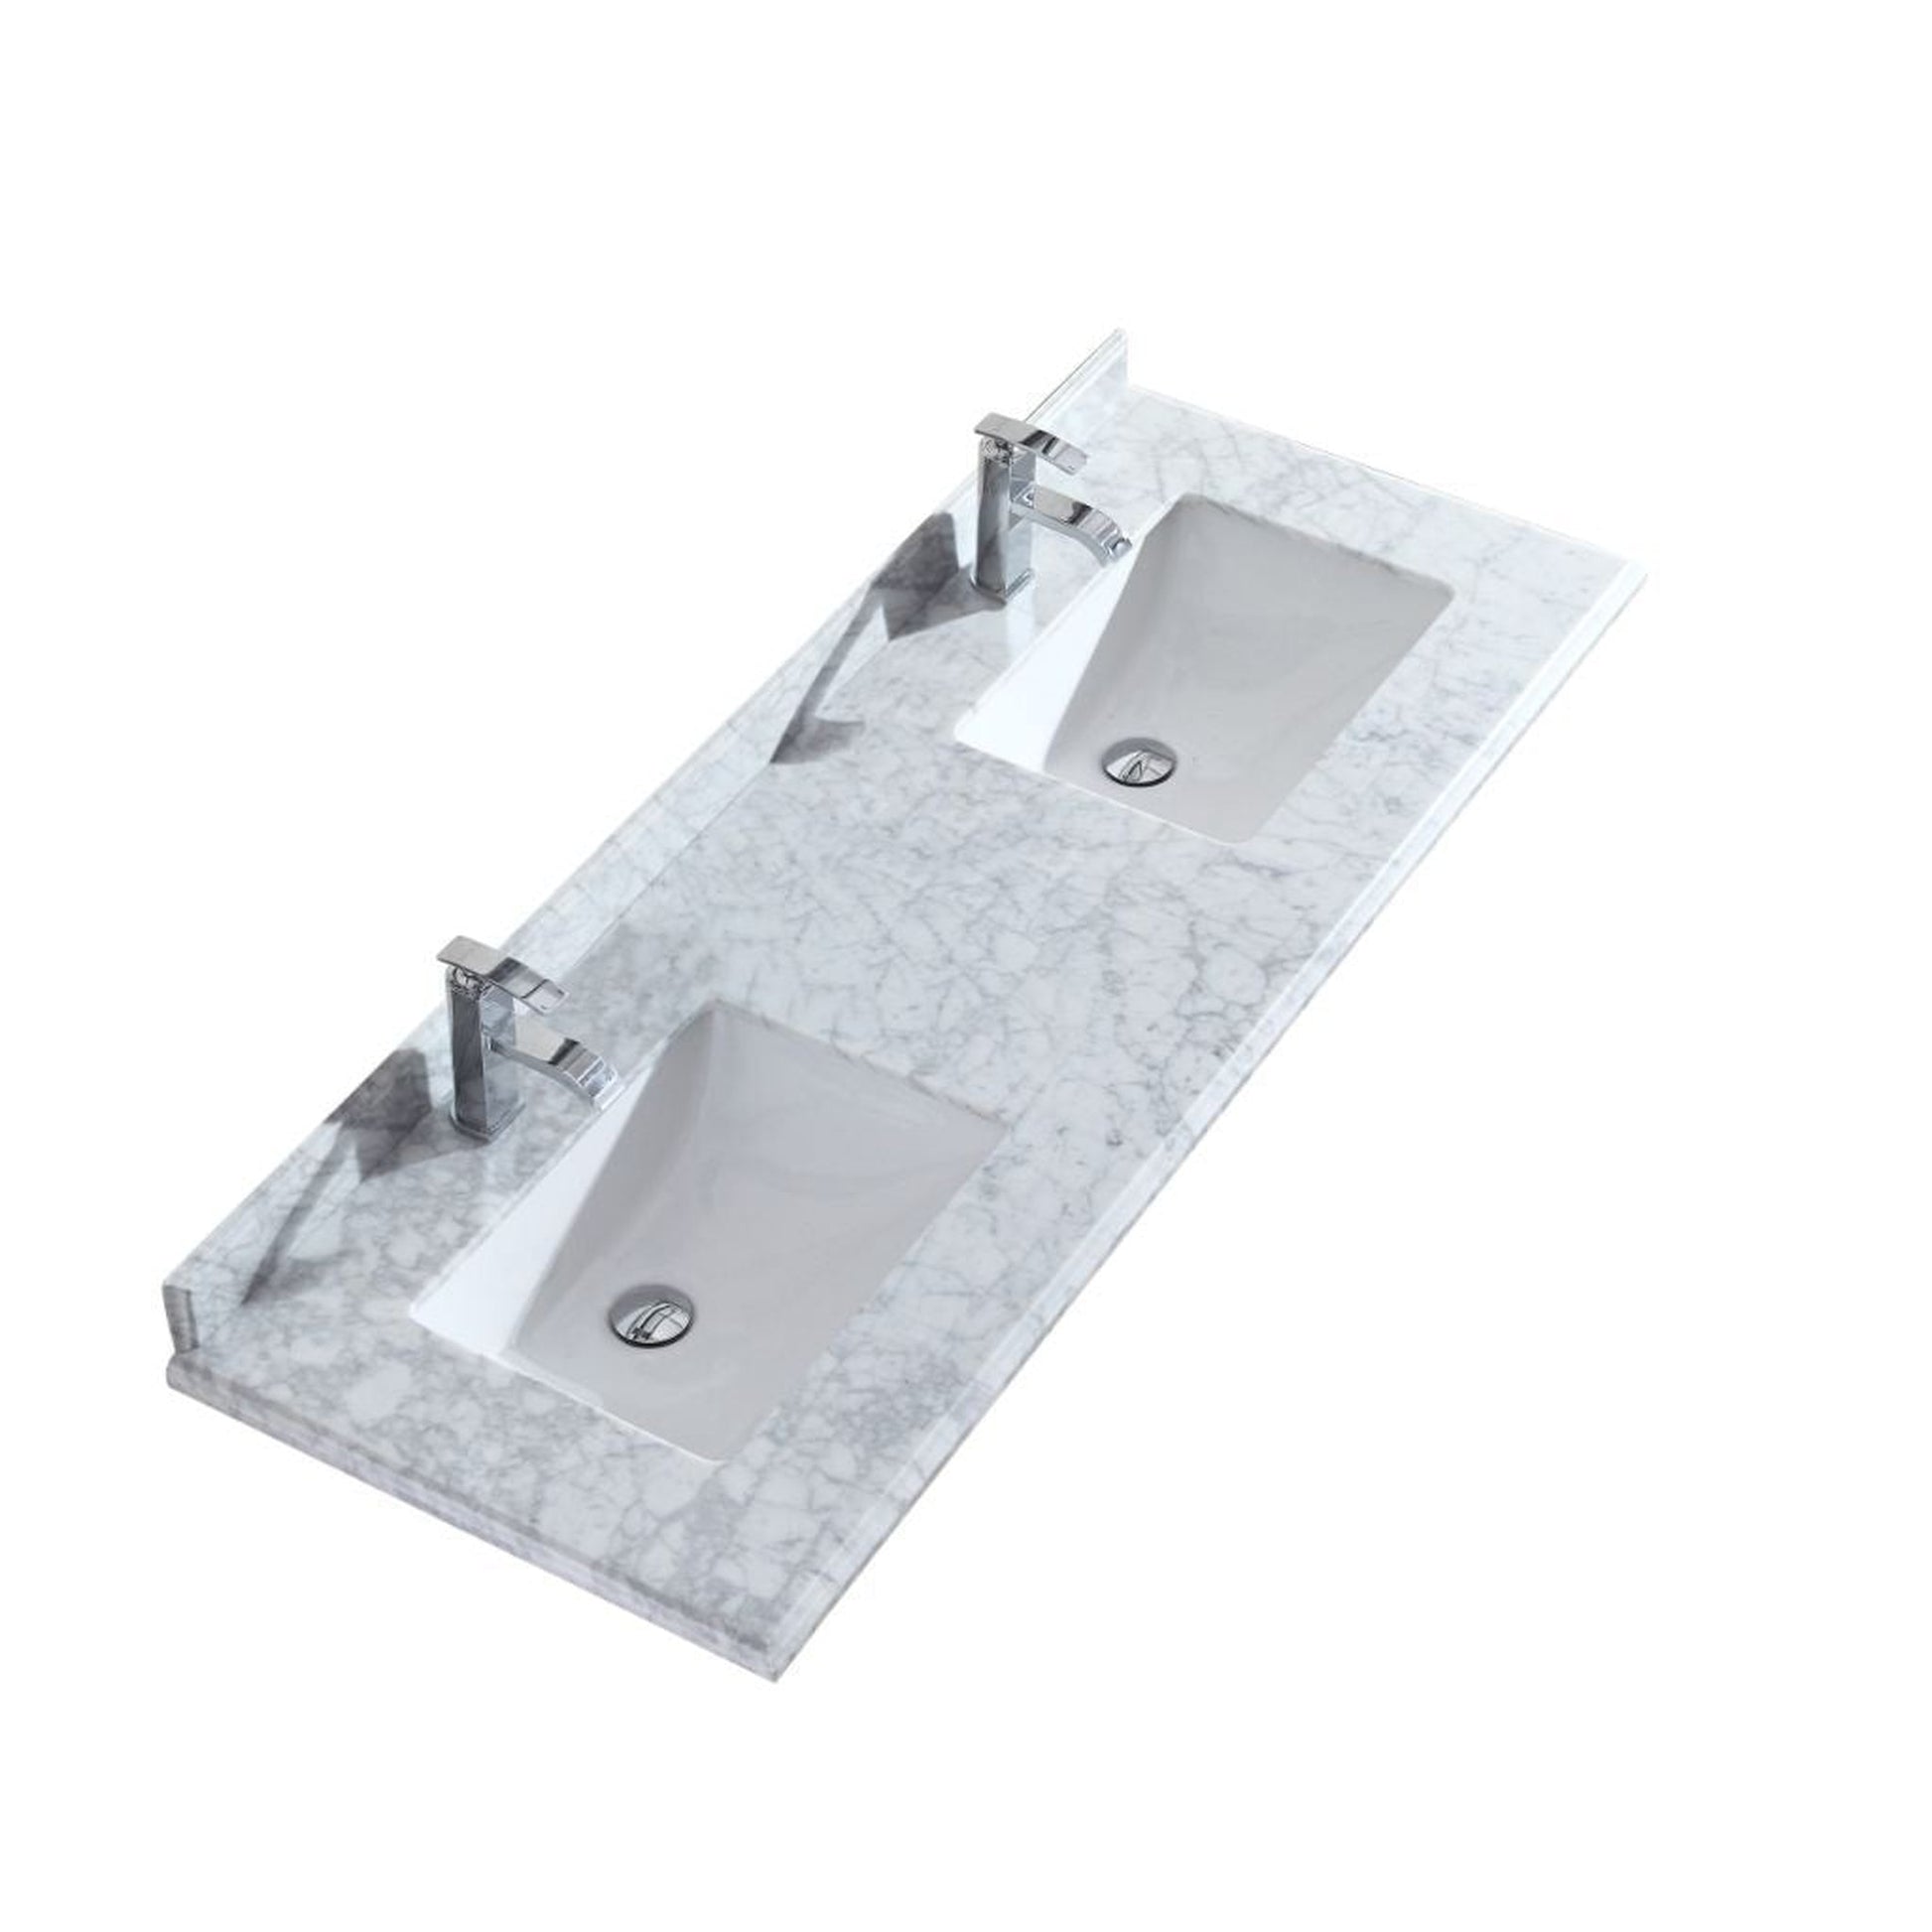 Laviva Forever 60" Single Hole White Carrara Marble Countertop With Double Rectangular Ceramic Sink